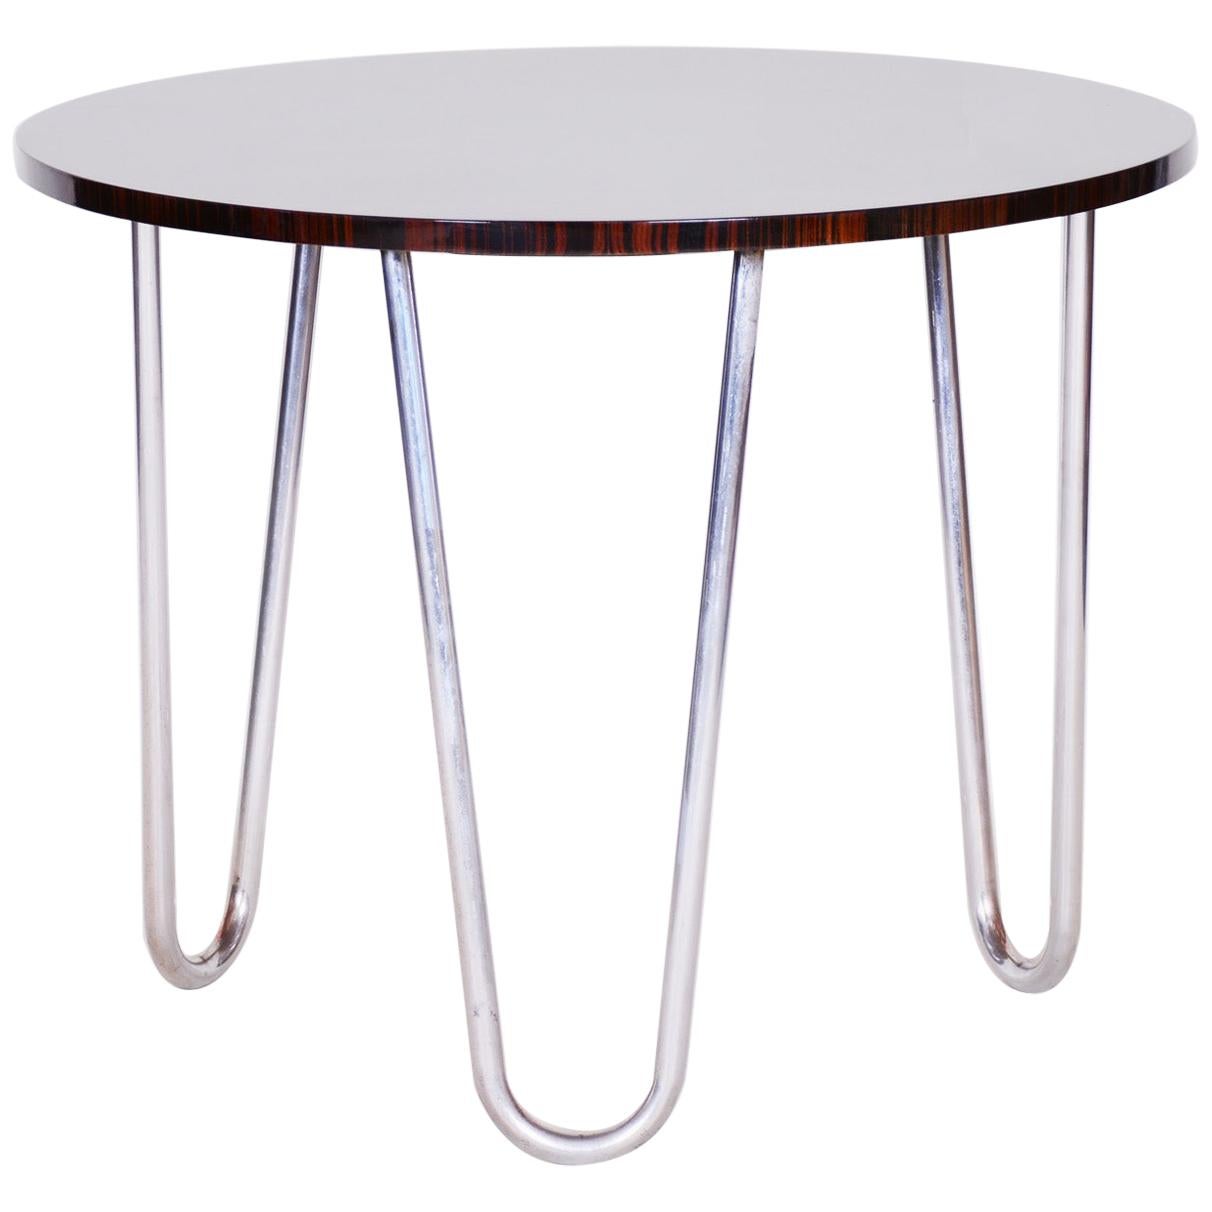 20th Century Restored Rounded Macassar Bauhaus Table, Chrome-Plated Steel, 1930s For Sale